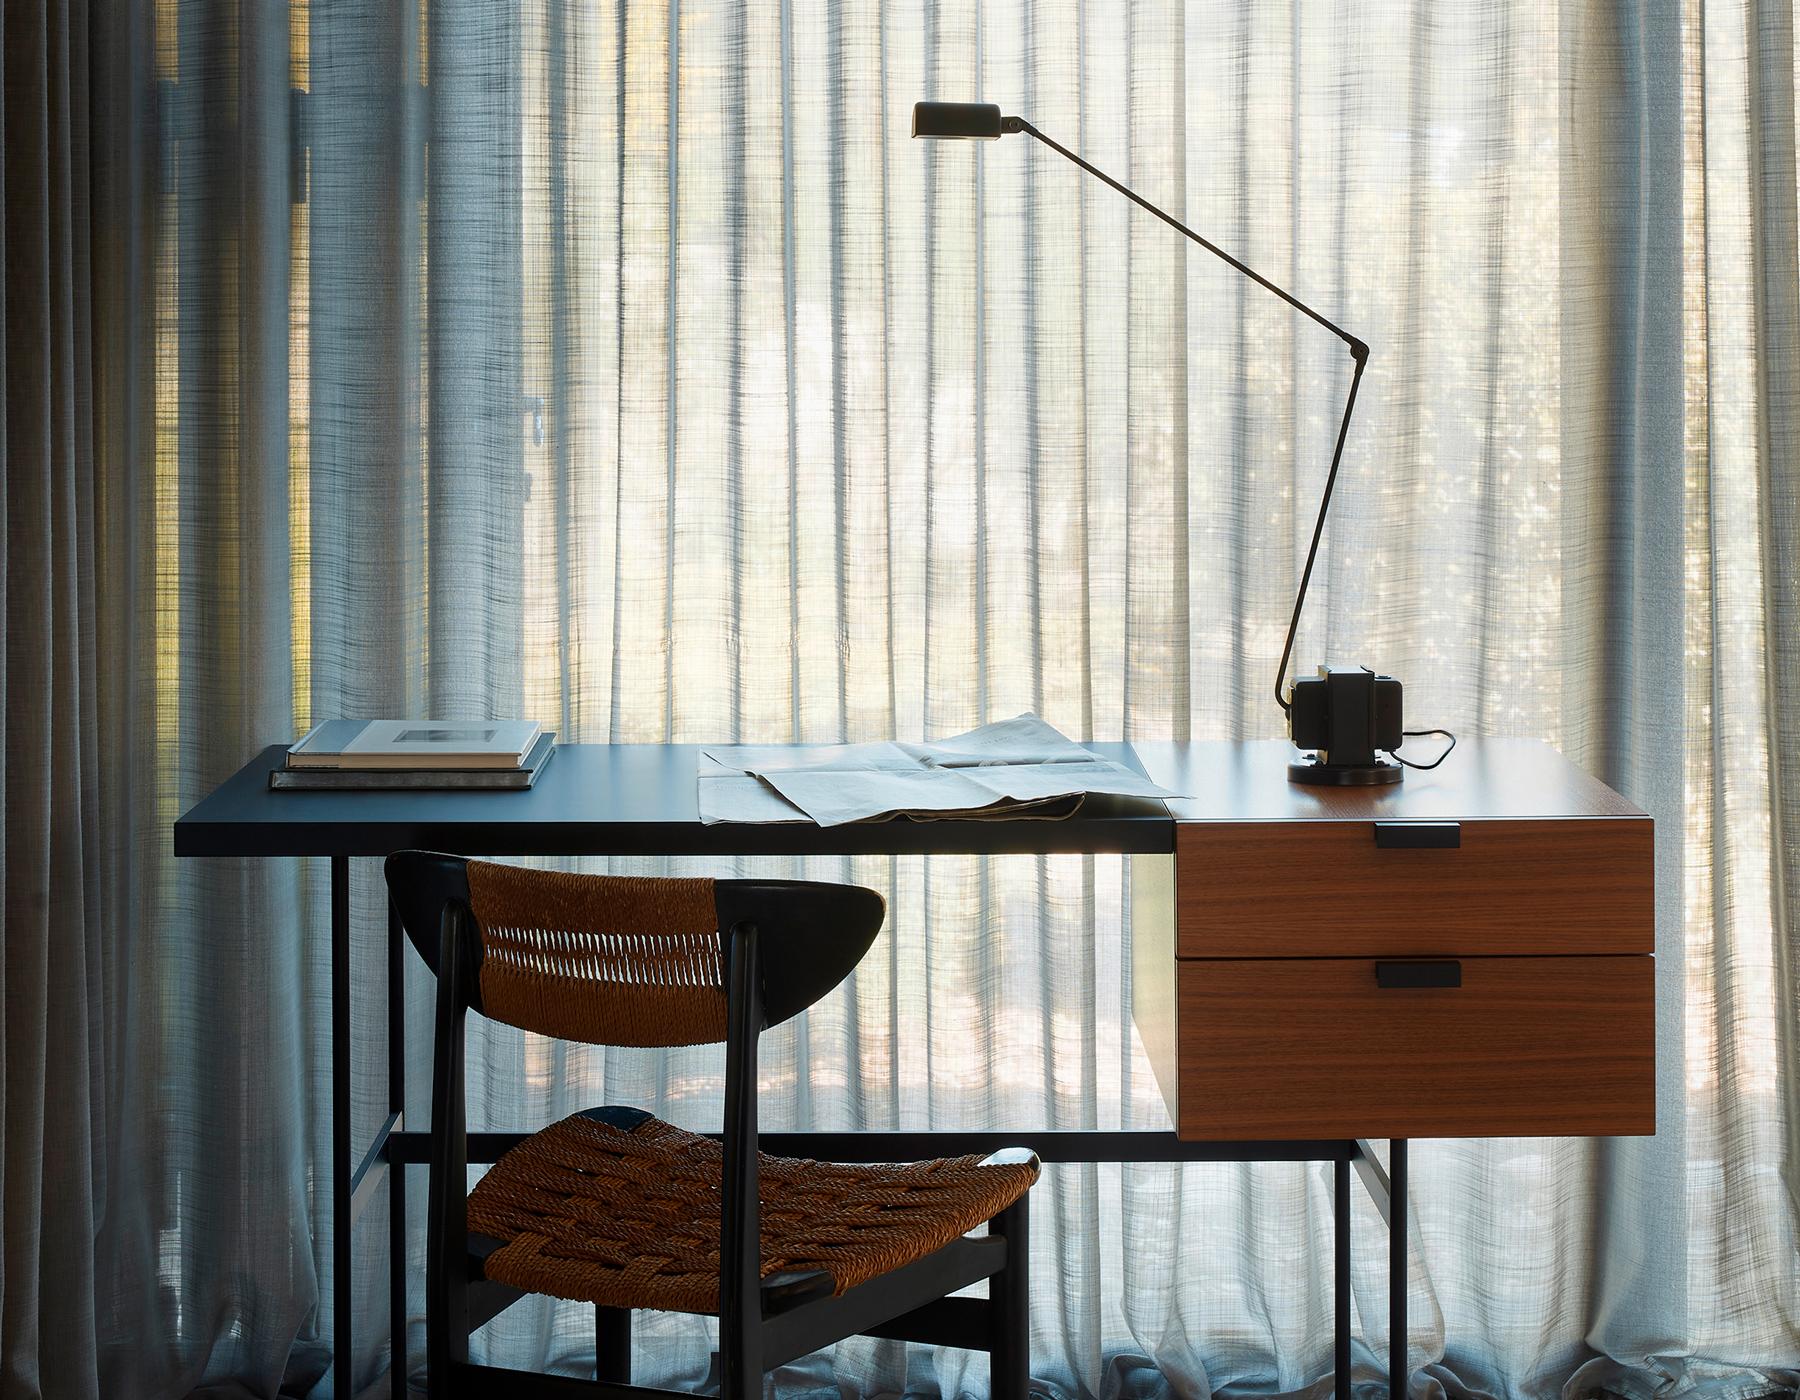 Lumina daphine LED table lamp in matt yellow by Tommaso Cimini.

Undisputed emblem of elegance and functionality, the daphine represents the essence of Lumina.
The idea behind the creation of the Daphine lamp is as simple as it is effective: a